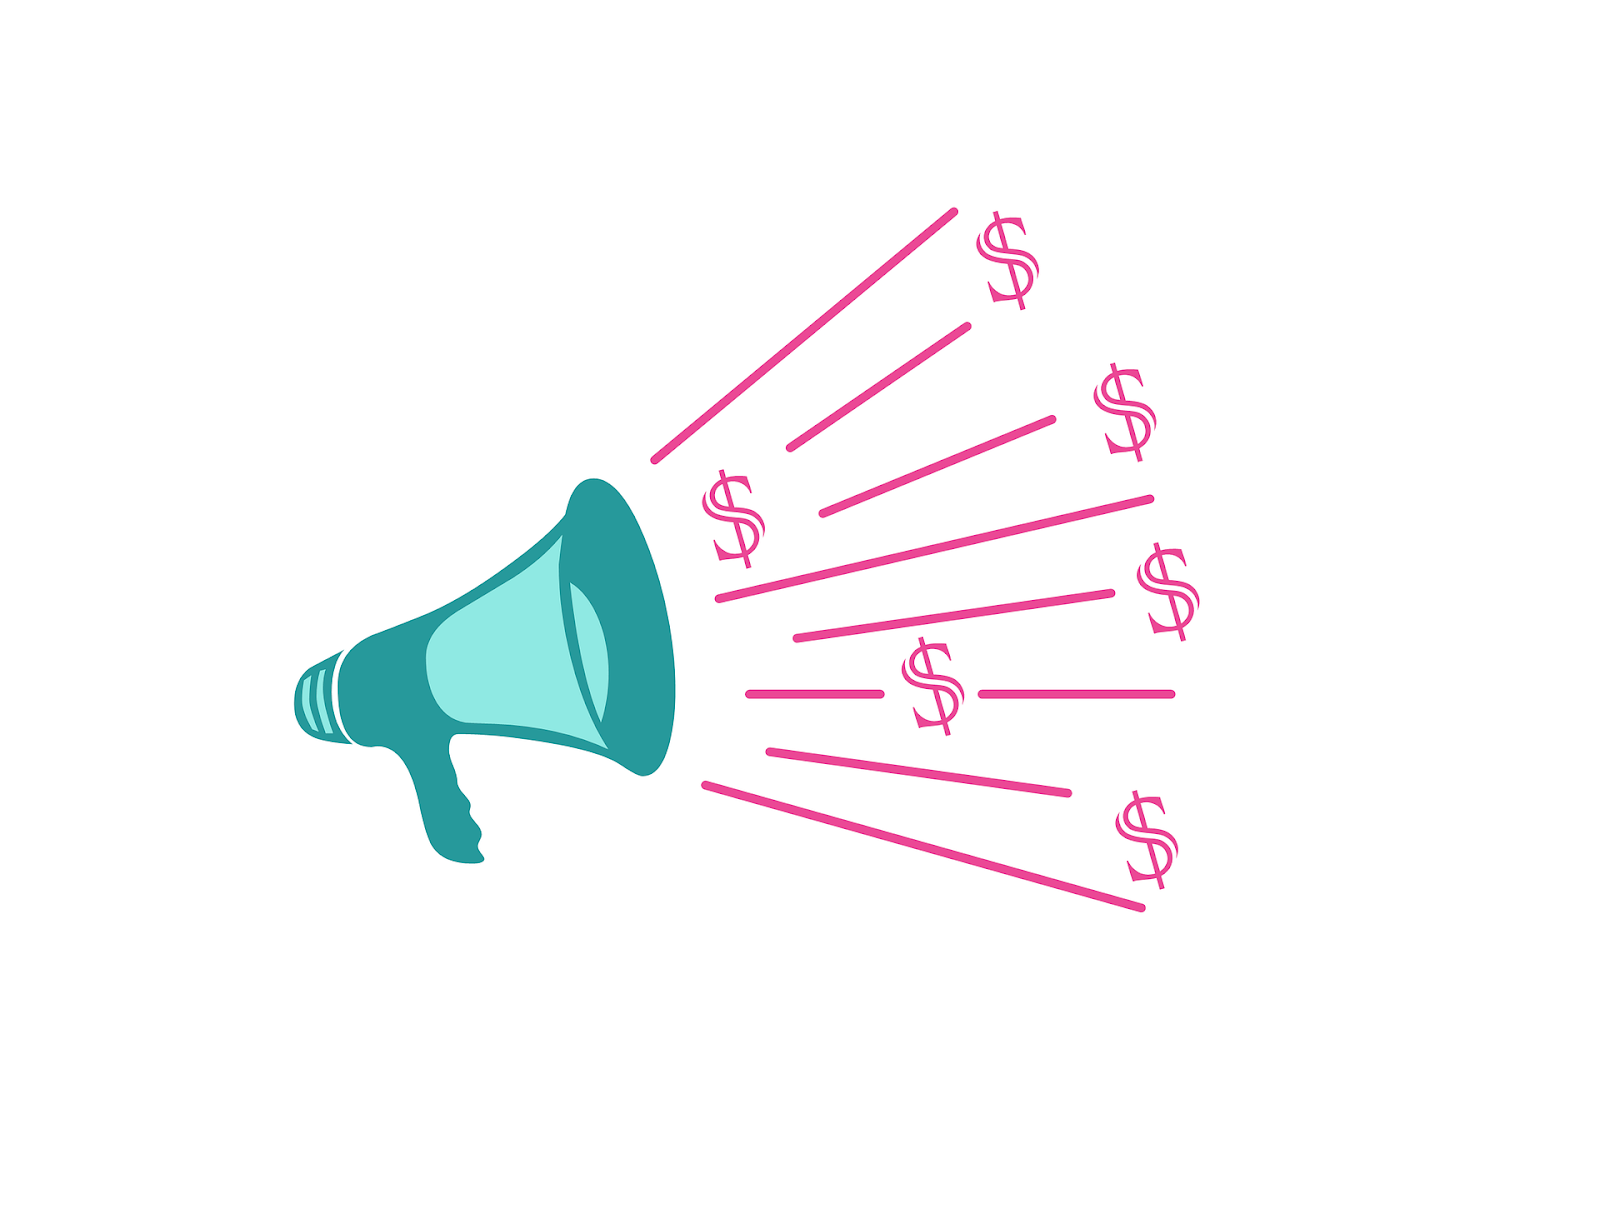 Turquoise megaphone with pink lines and dollar signs emitting from it, representing the financial benefits of a strong brand voice